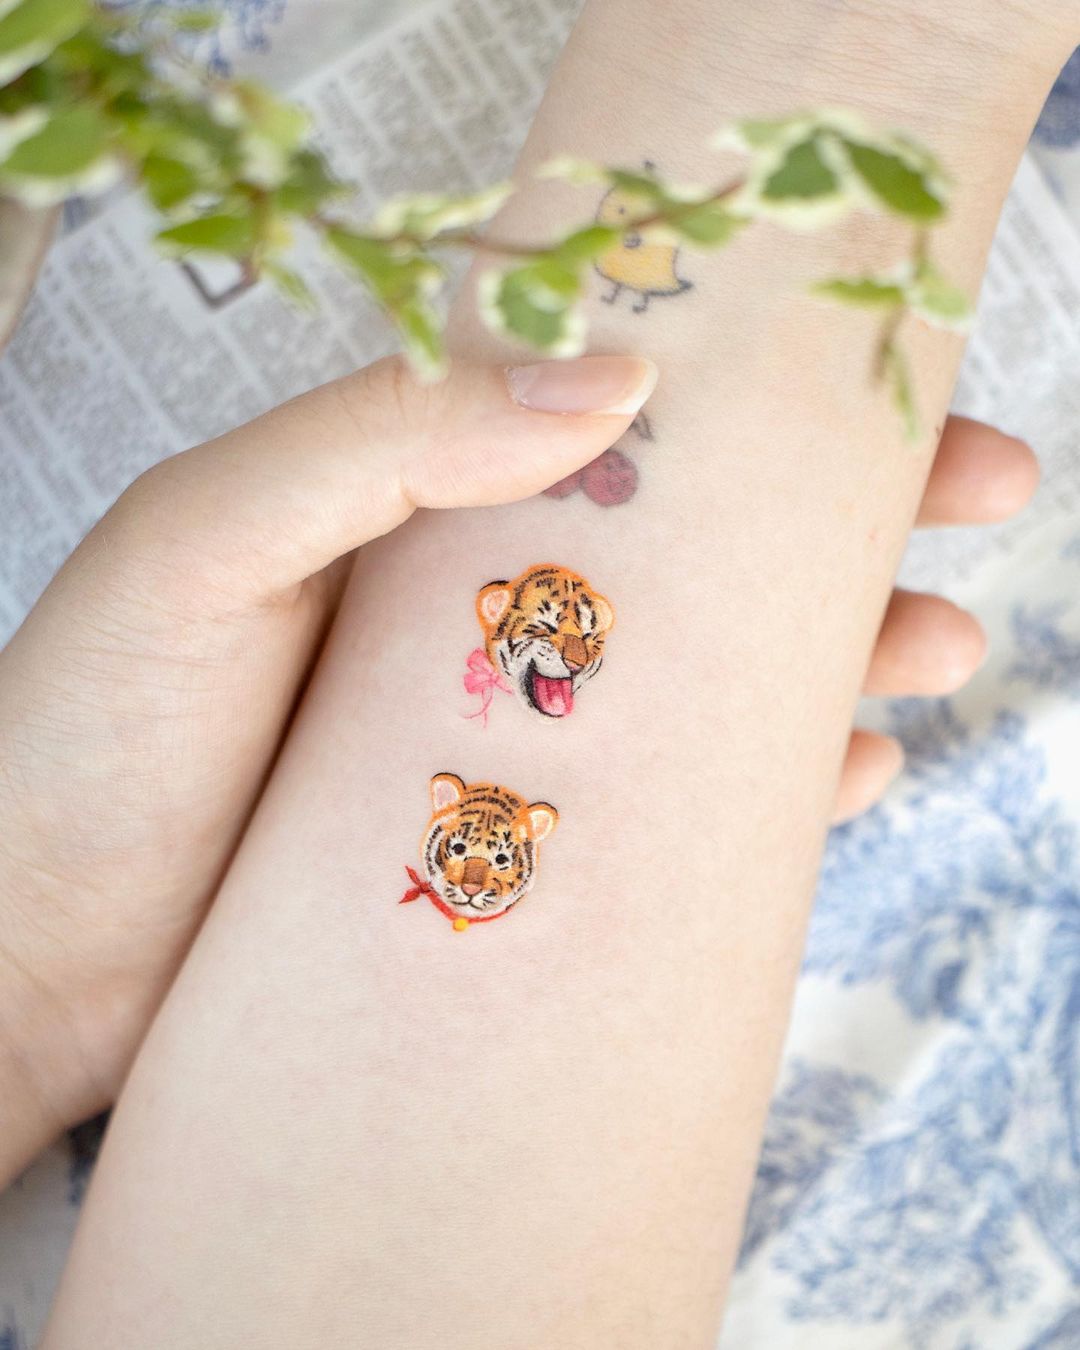 Chip n Dale tattoo done by Brandi Dunning  Black Mint Collective OKC  Japanese tattoo sleeve btct  Disney tattoos Disney sleeve tattoos  Disney inspired tattoos